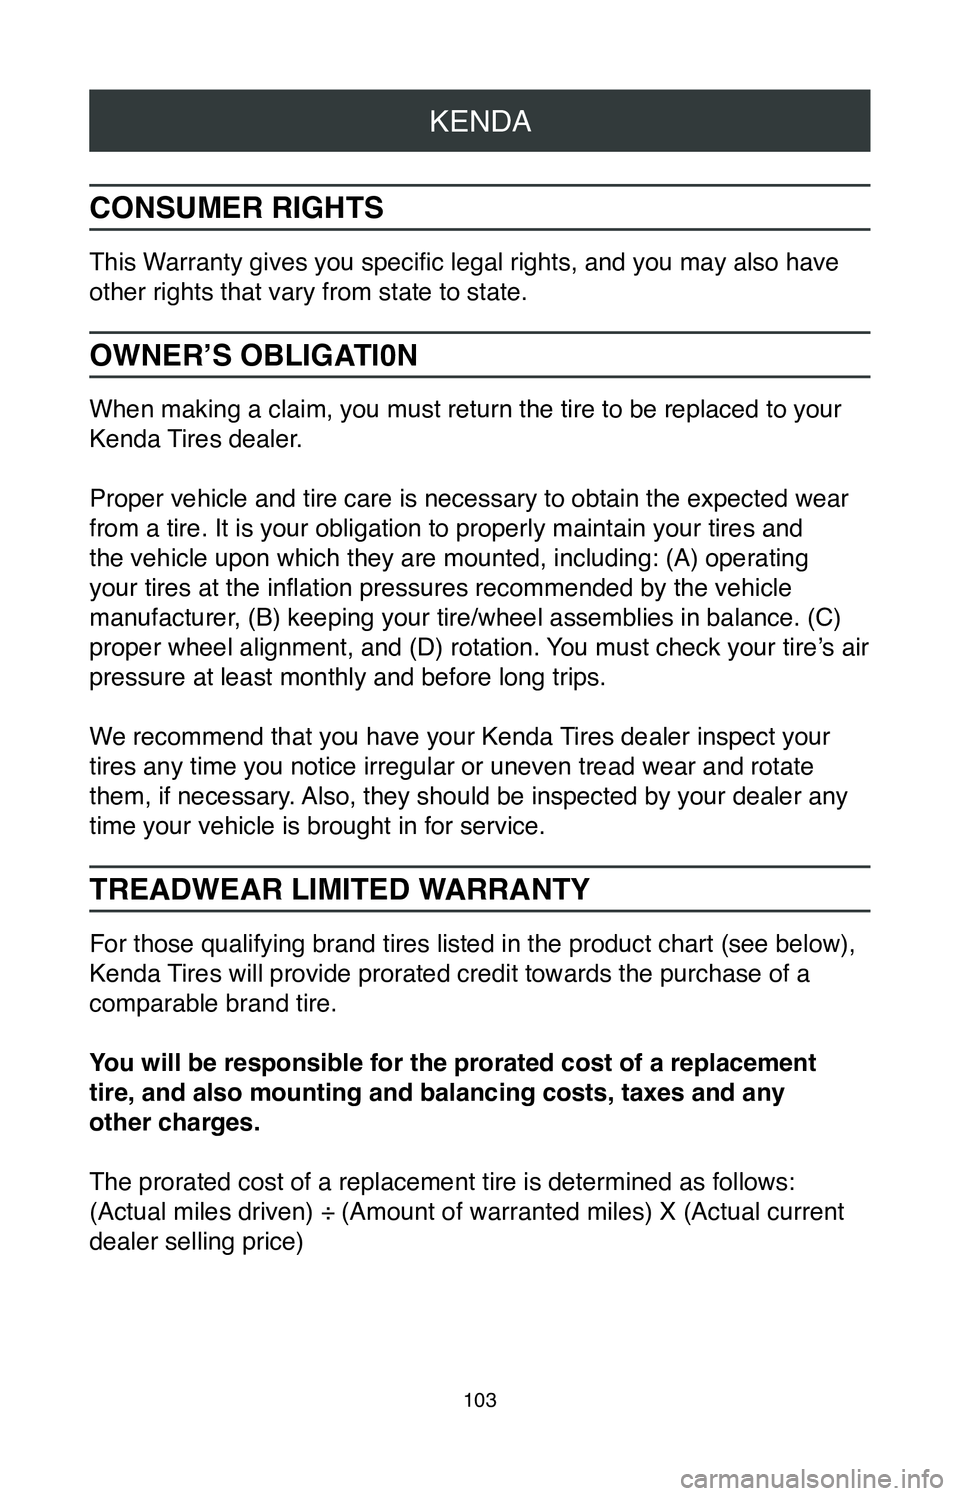 TOYOTA AVALON HYBRID 2020  Warranties & Maintenance Guides (in English) KENDA
103
CONSUMER RIGHTS
This Warranty gives you specific legal rights, and you may also have 
other rights that vary from state to state.
OWNER’S OBLIGATl0N
When making a claim, you must return th